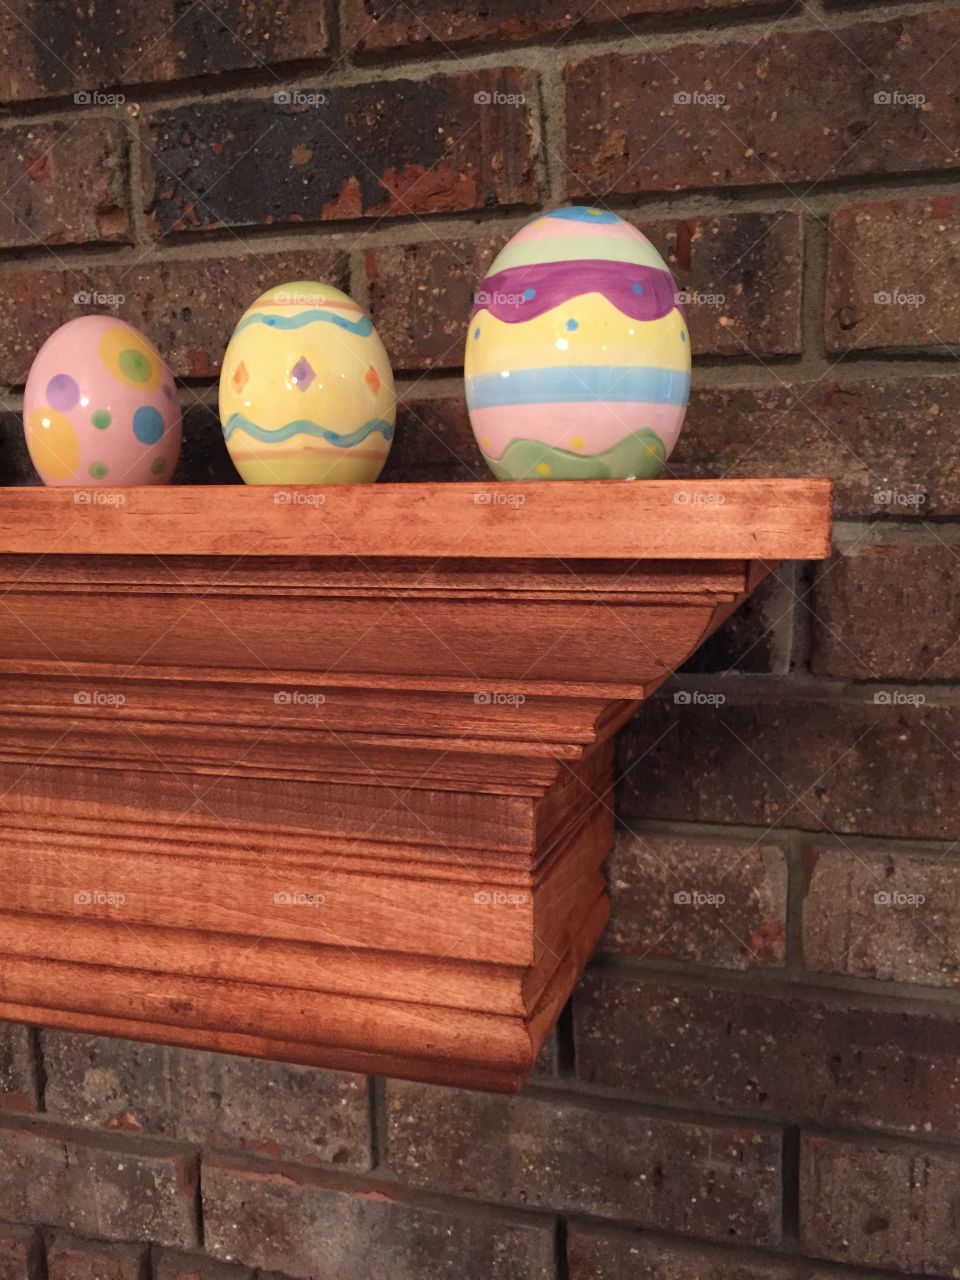 Easter decorations on the fireplace mantle